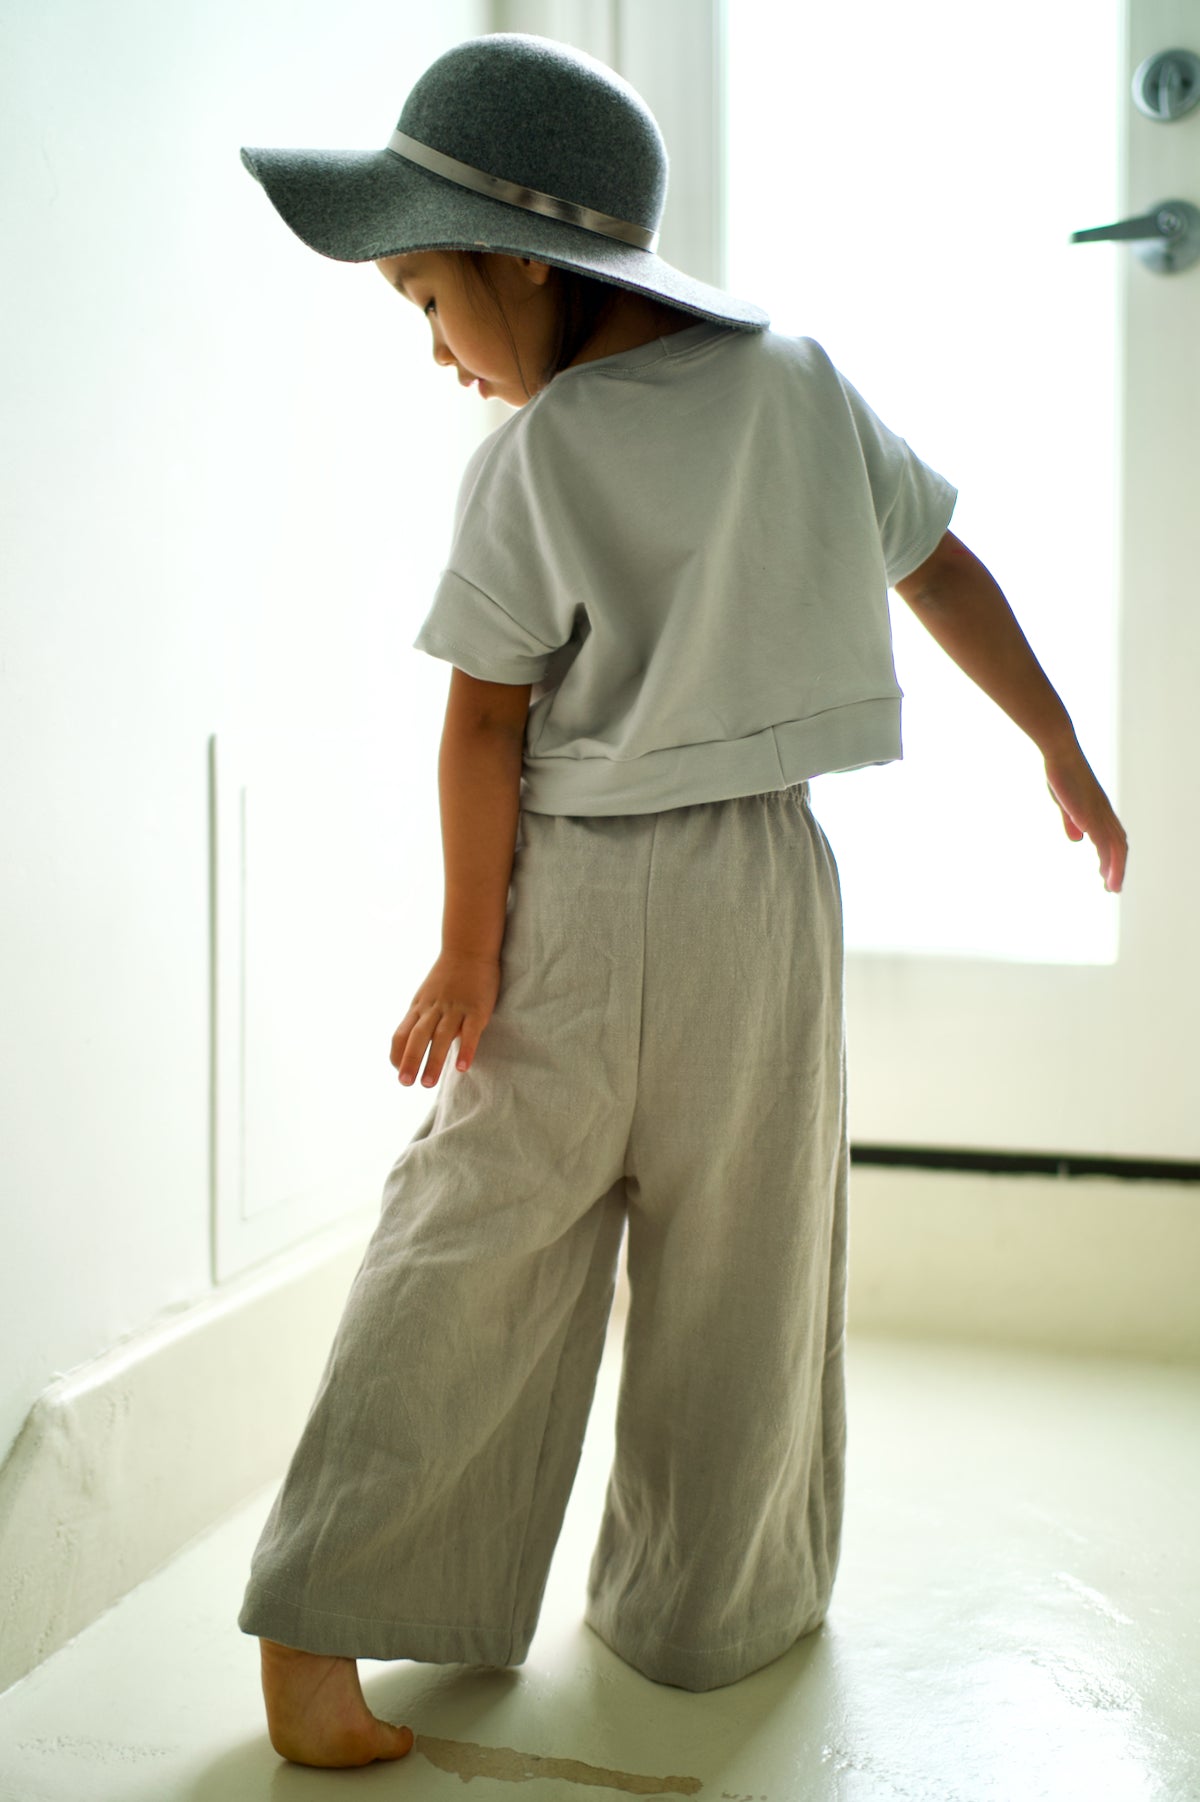 High-Waisted Wide-Leg School Uniform Pants for Girls - Old Navy Philippines